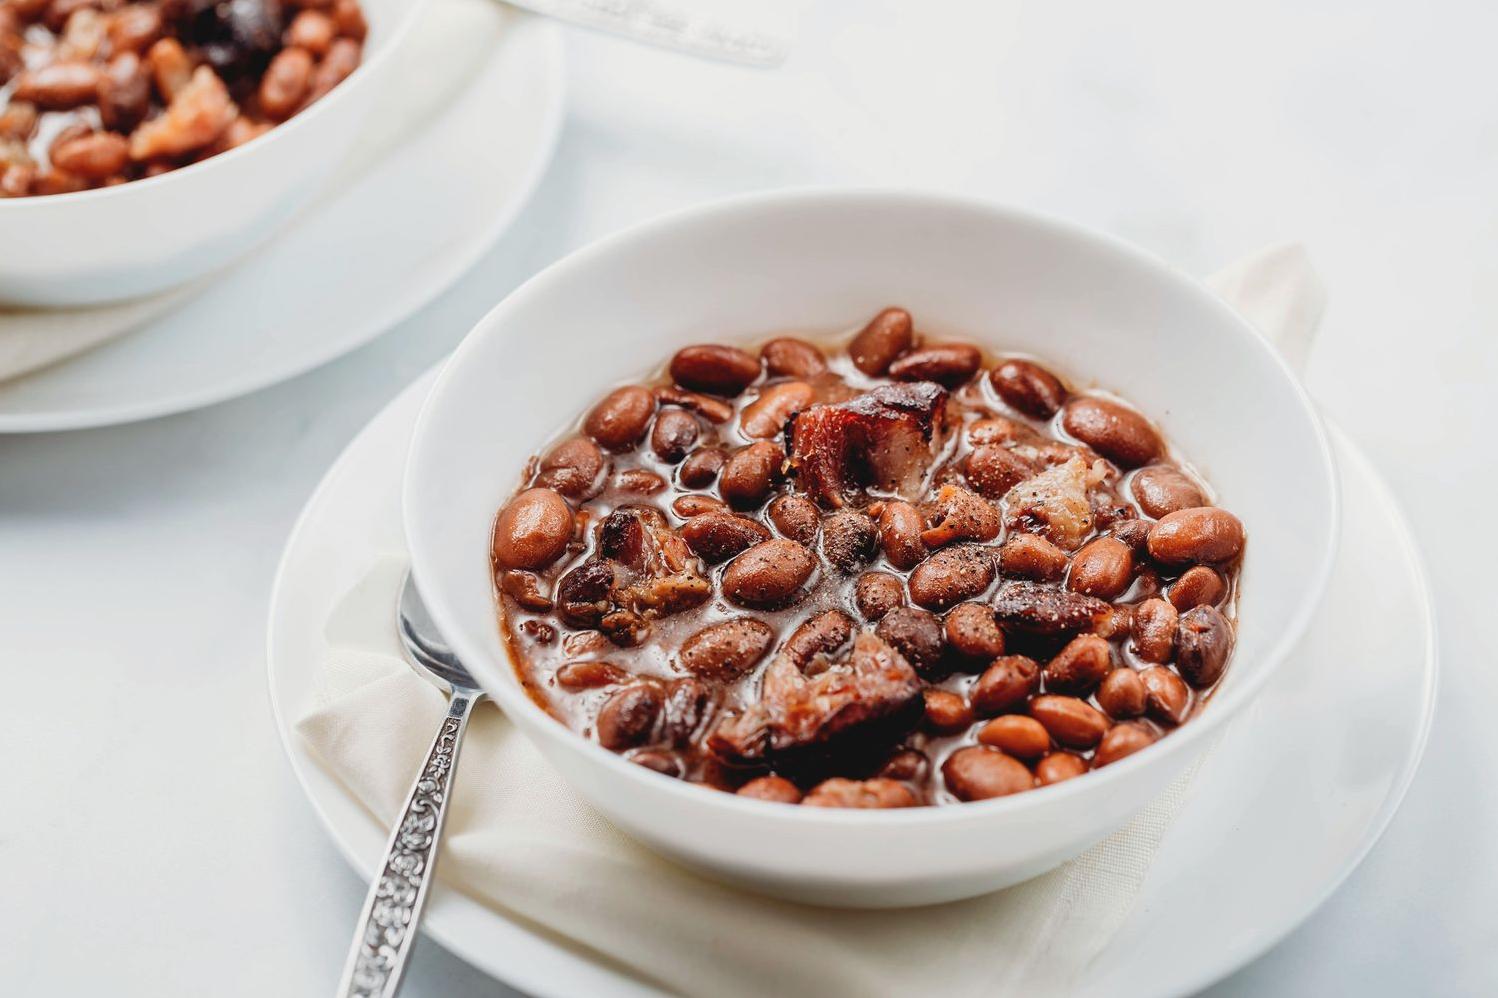  Slow-cooked to perfection: Southern pinto beans and ham hocks